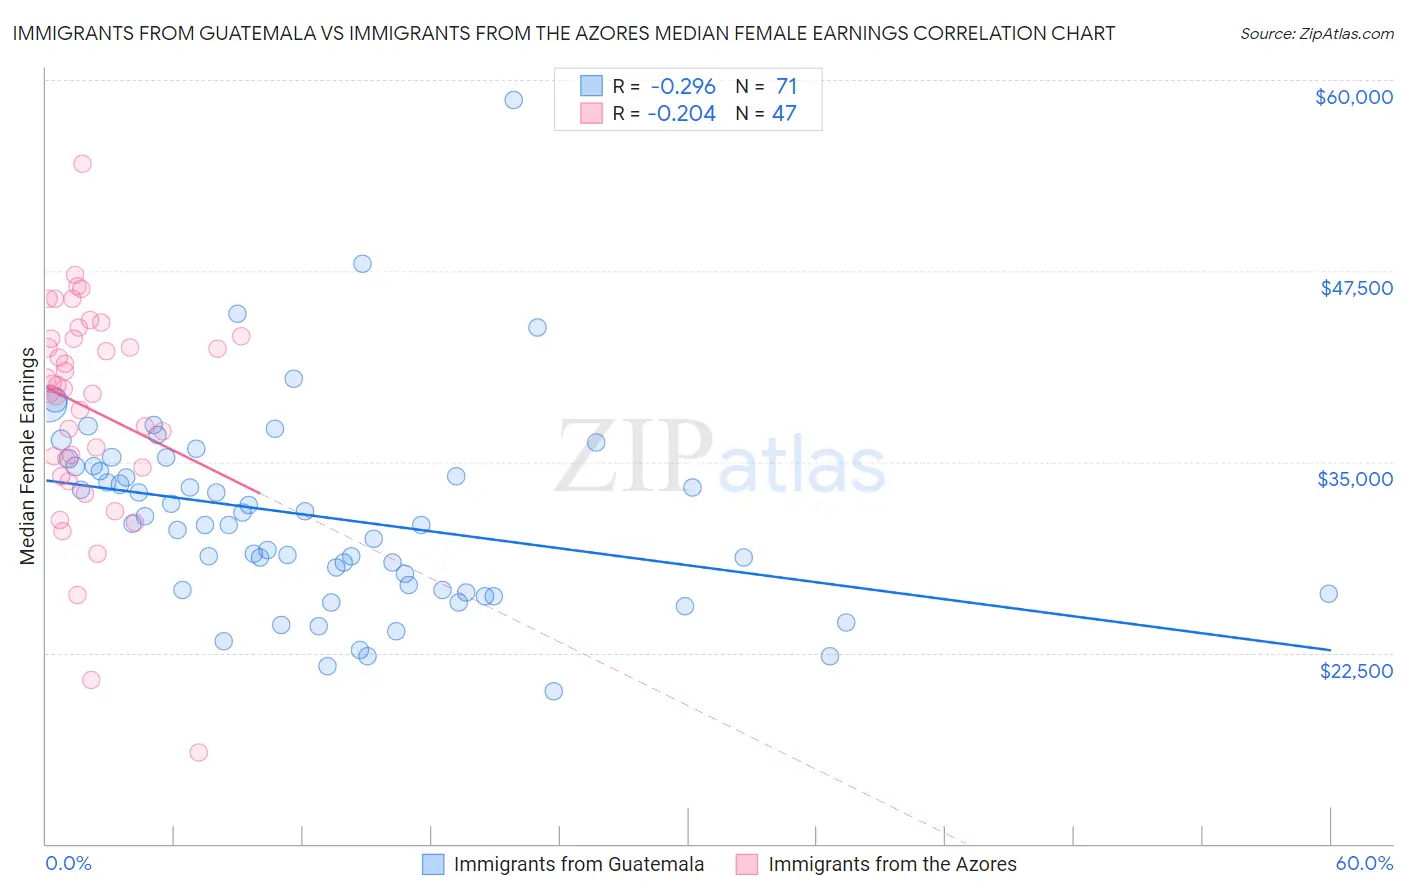 Immigrants from Guatemala vs Immigrants from the Azores Median Female Earnings